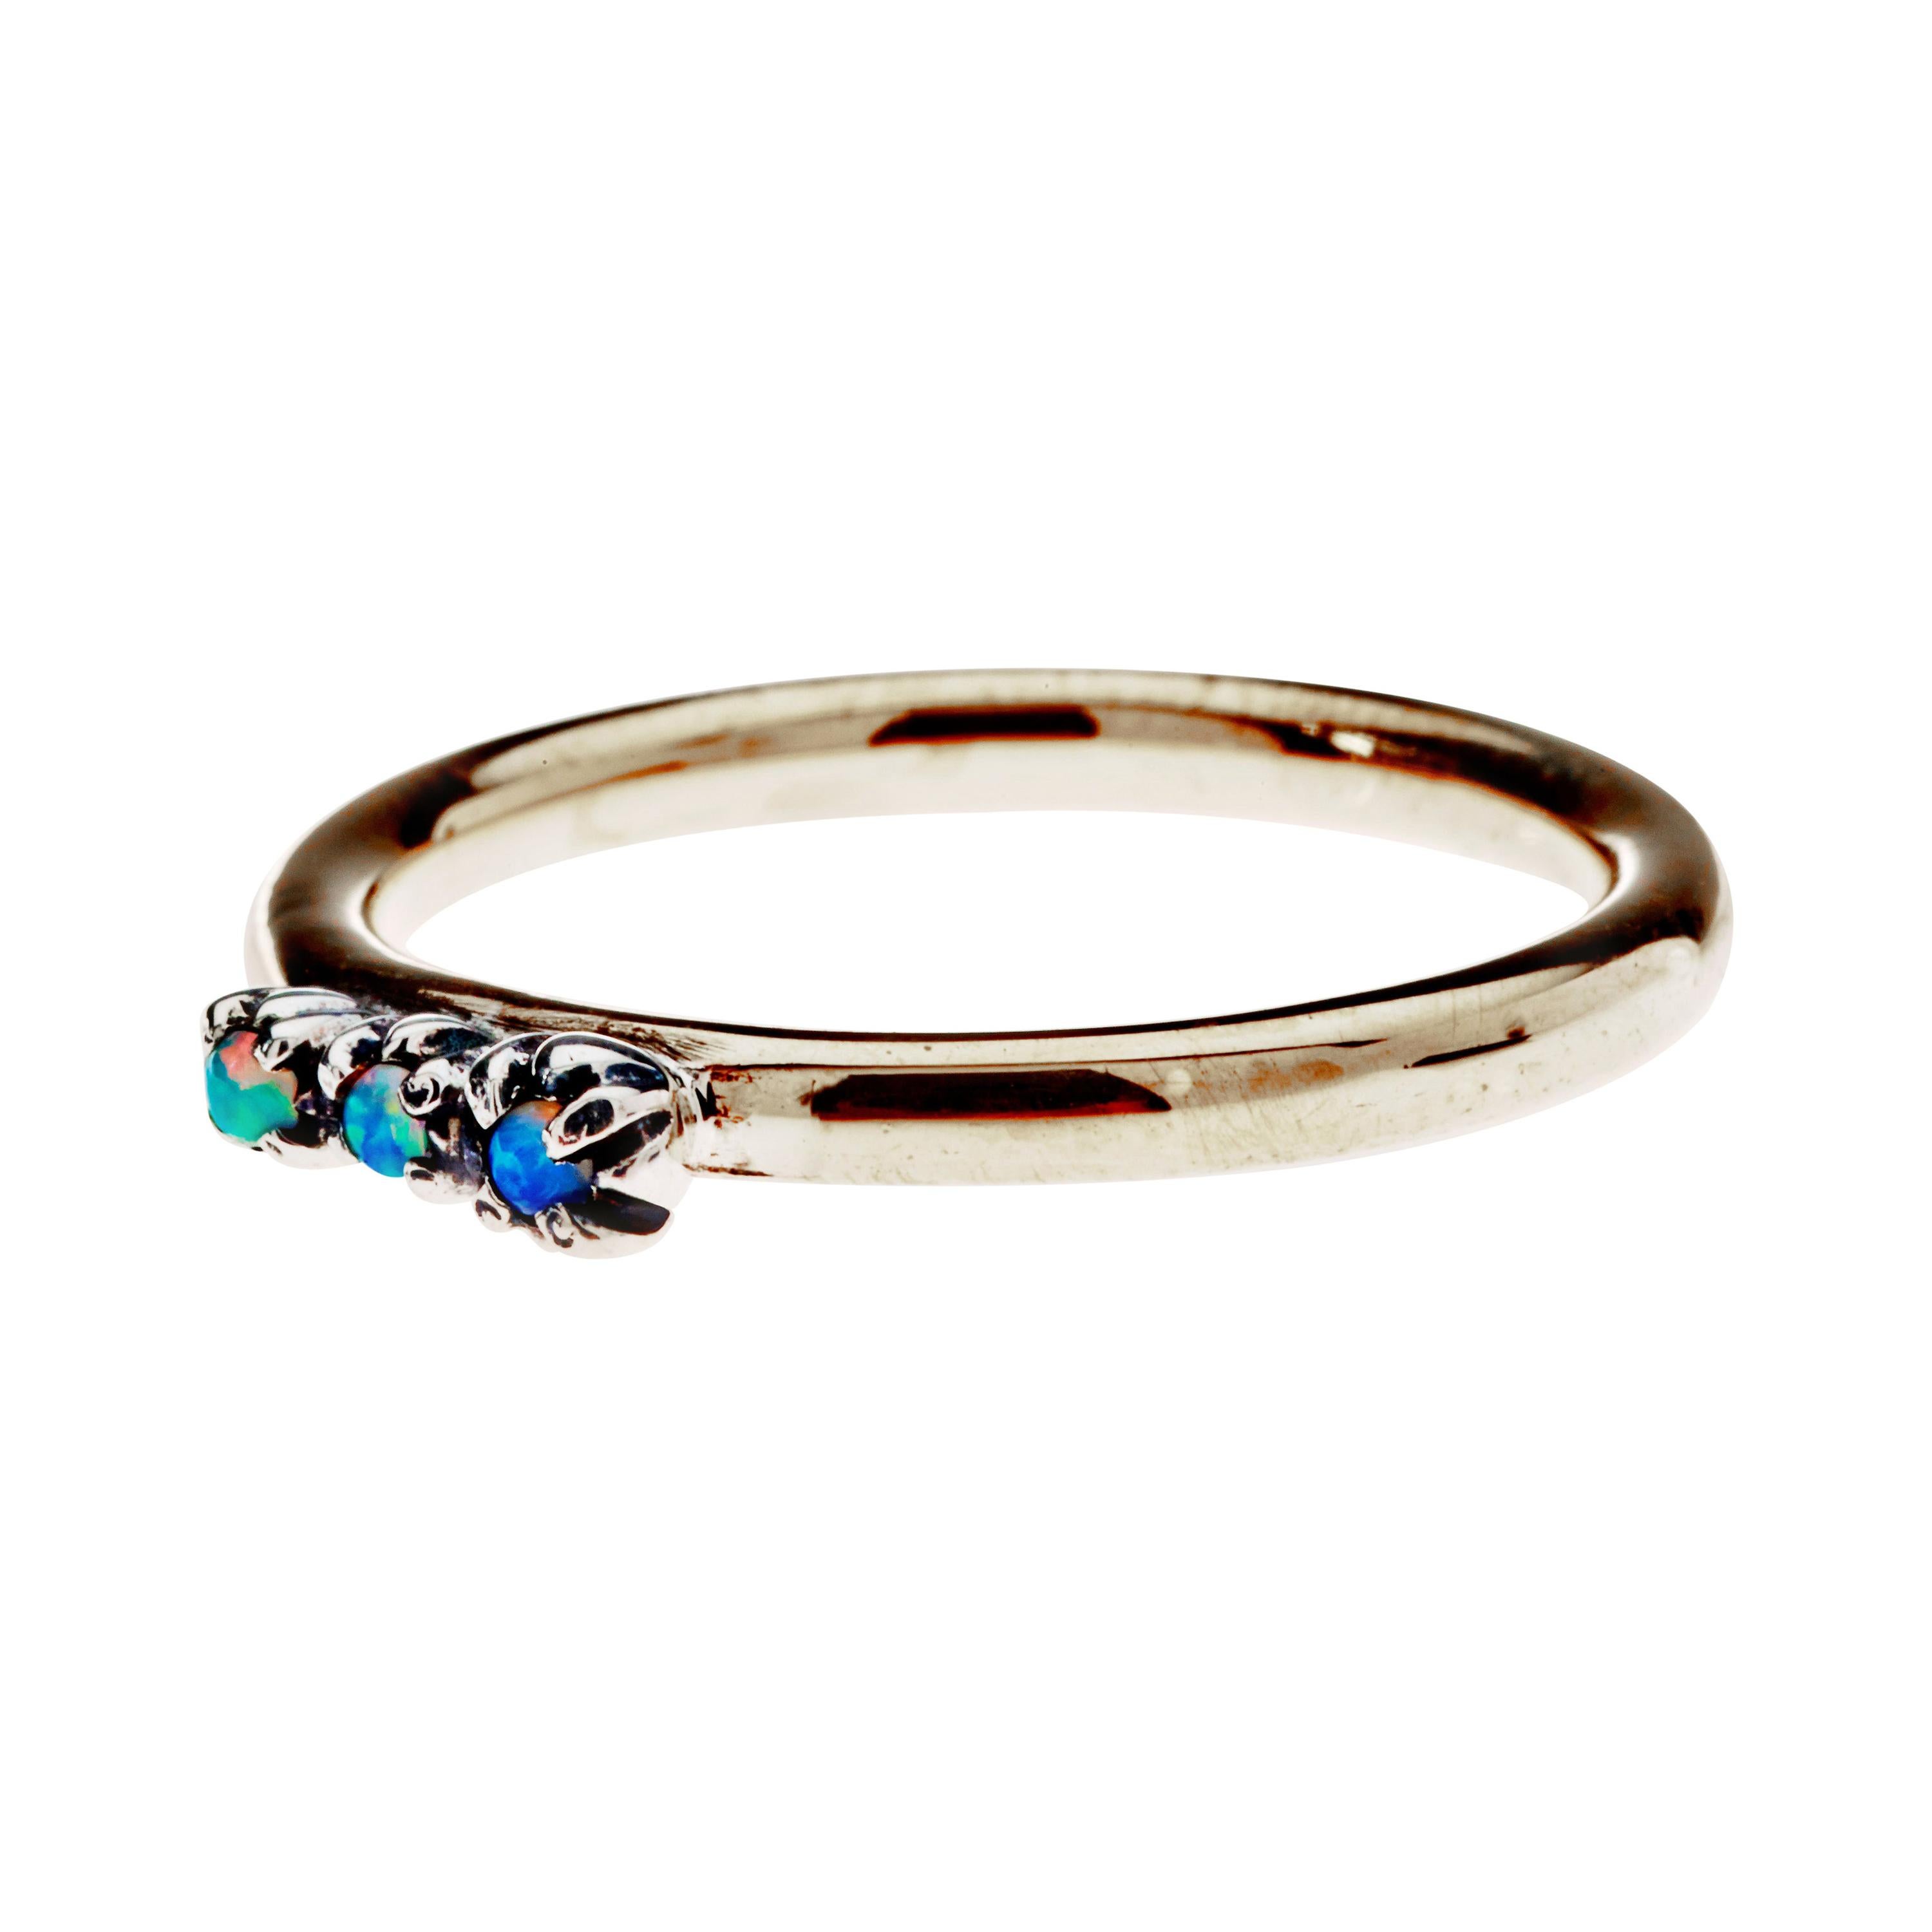 Opal Gold Ring Silver Prong Victorian Style Cocktail Ring J Dauphin